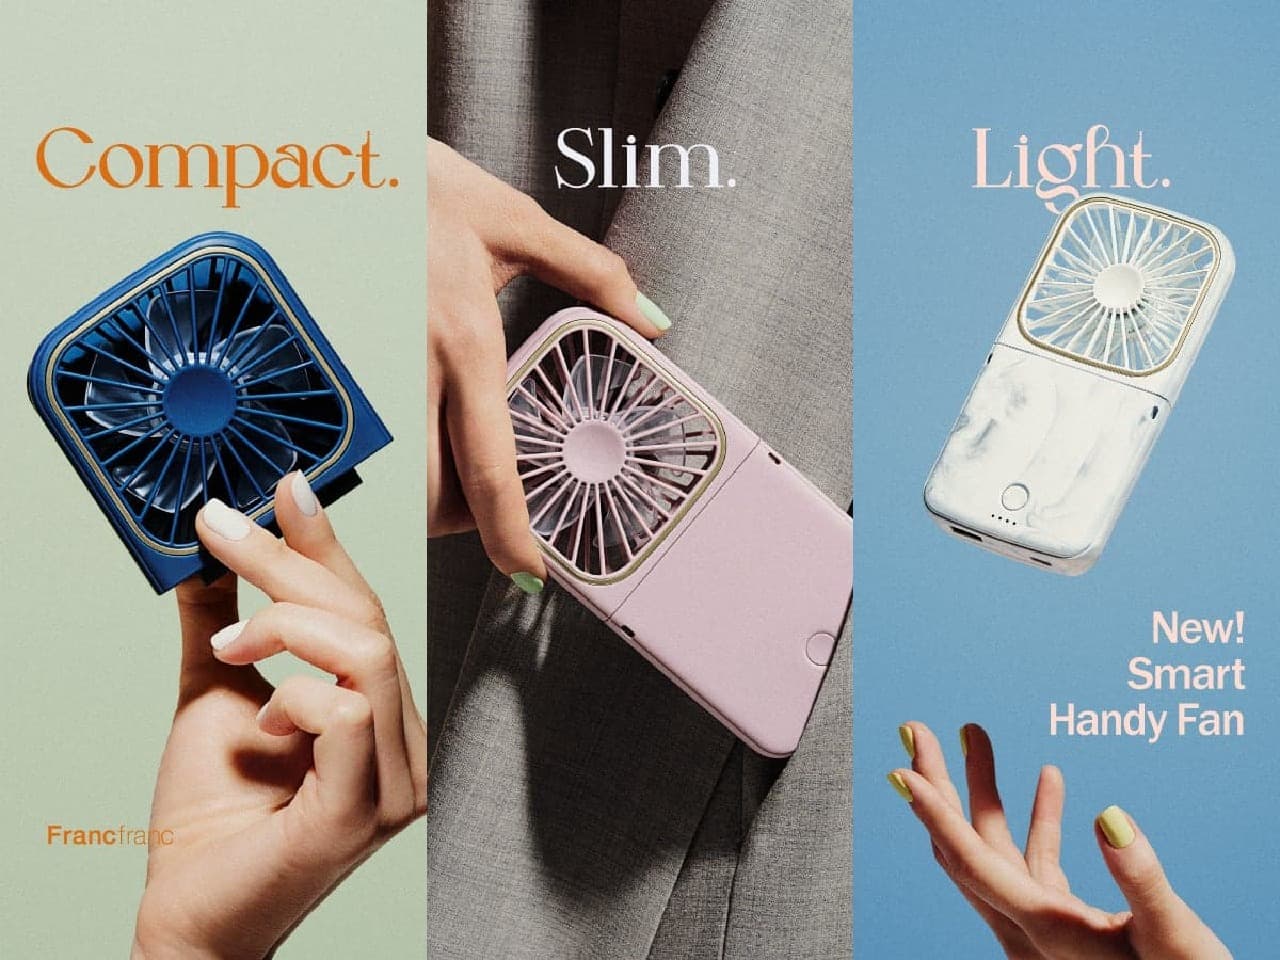 Francfranc restocks "FLE Smart Handy Fan" in all colors! - Lightweight, thin, easy to carry, and can be used continuously for up to 10 hours (new visual release) Image 1